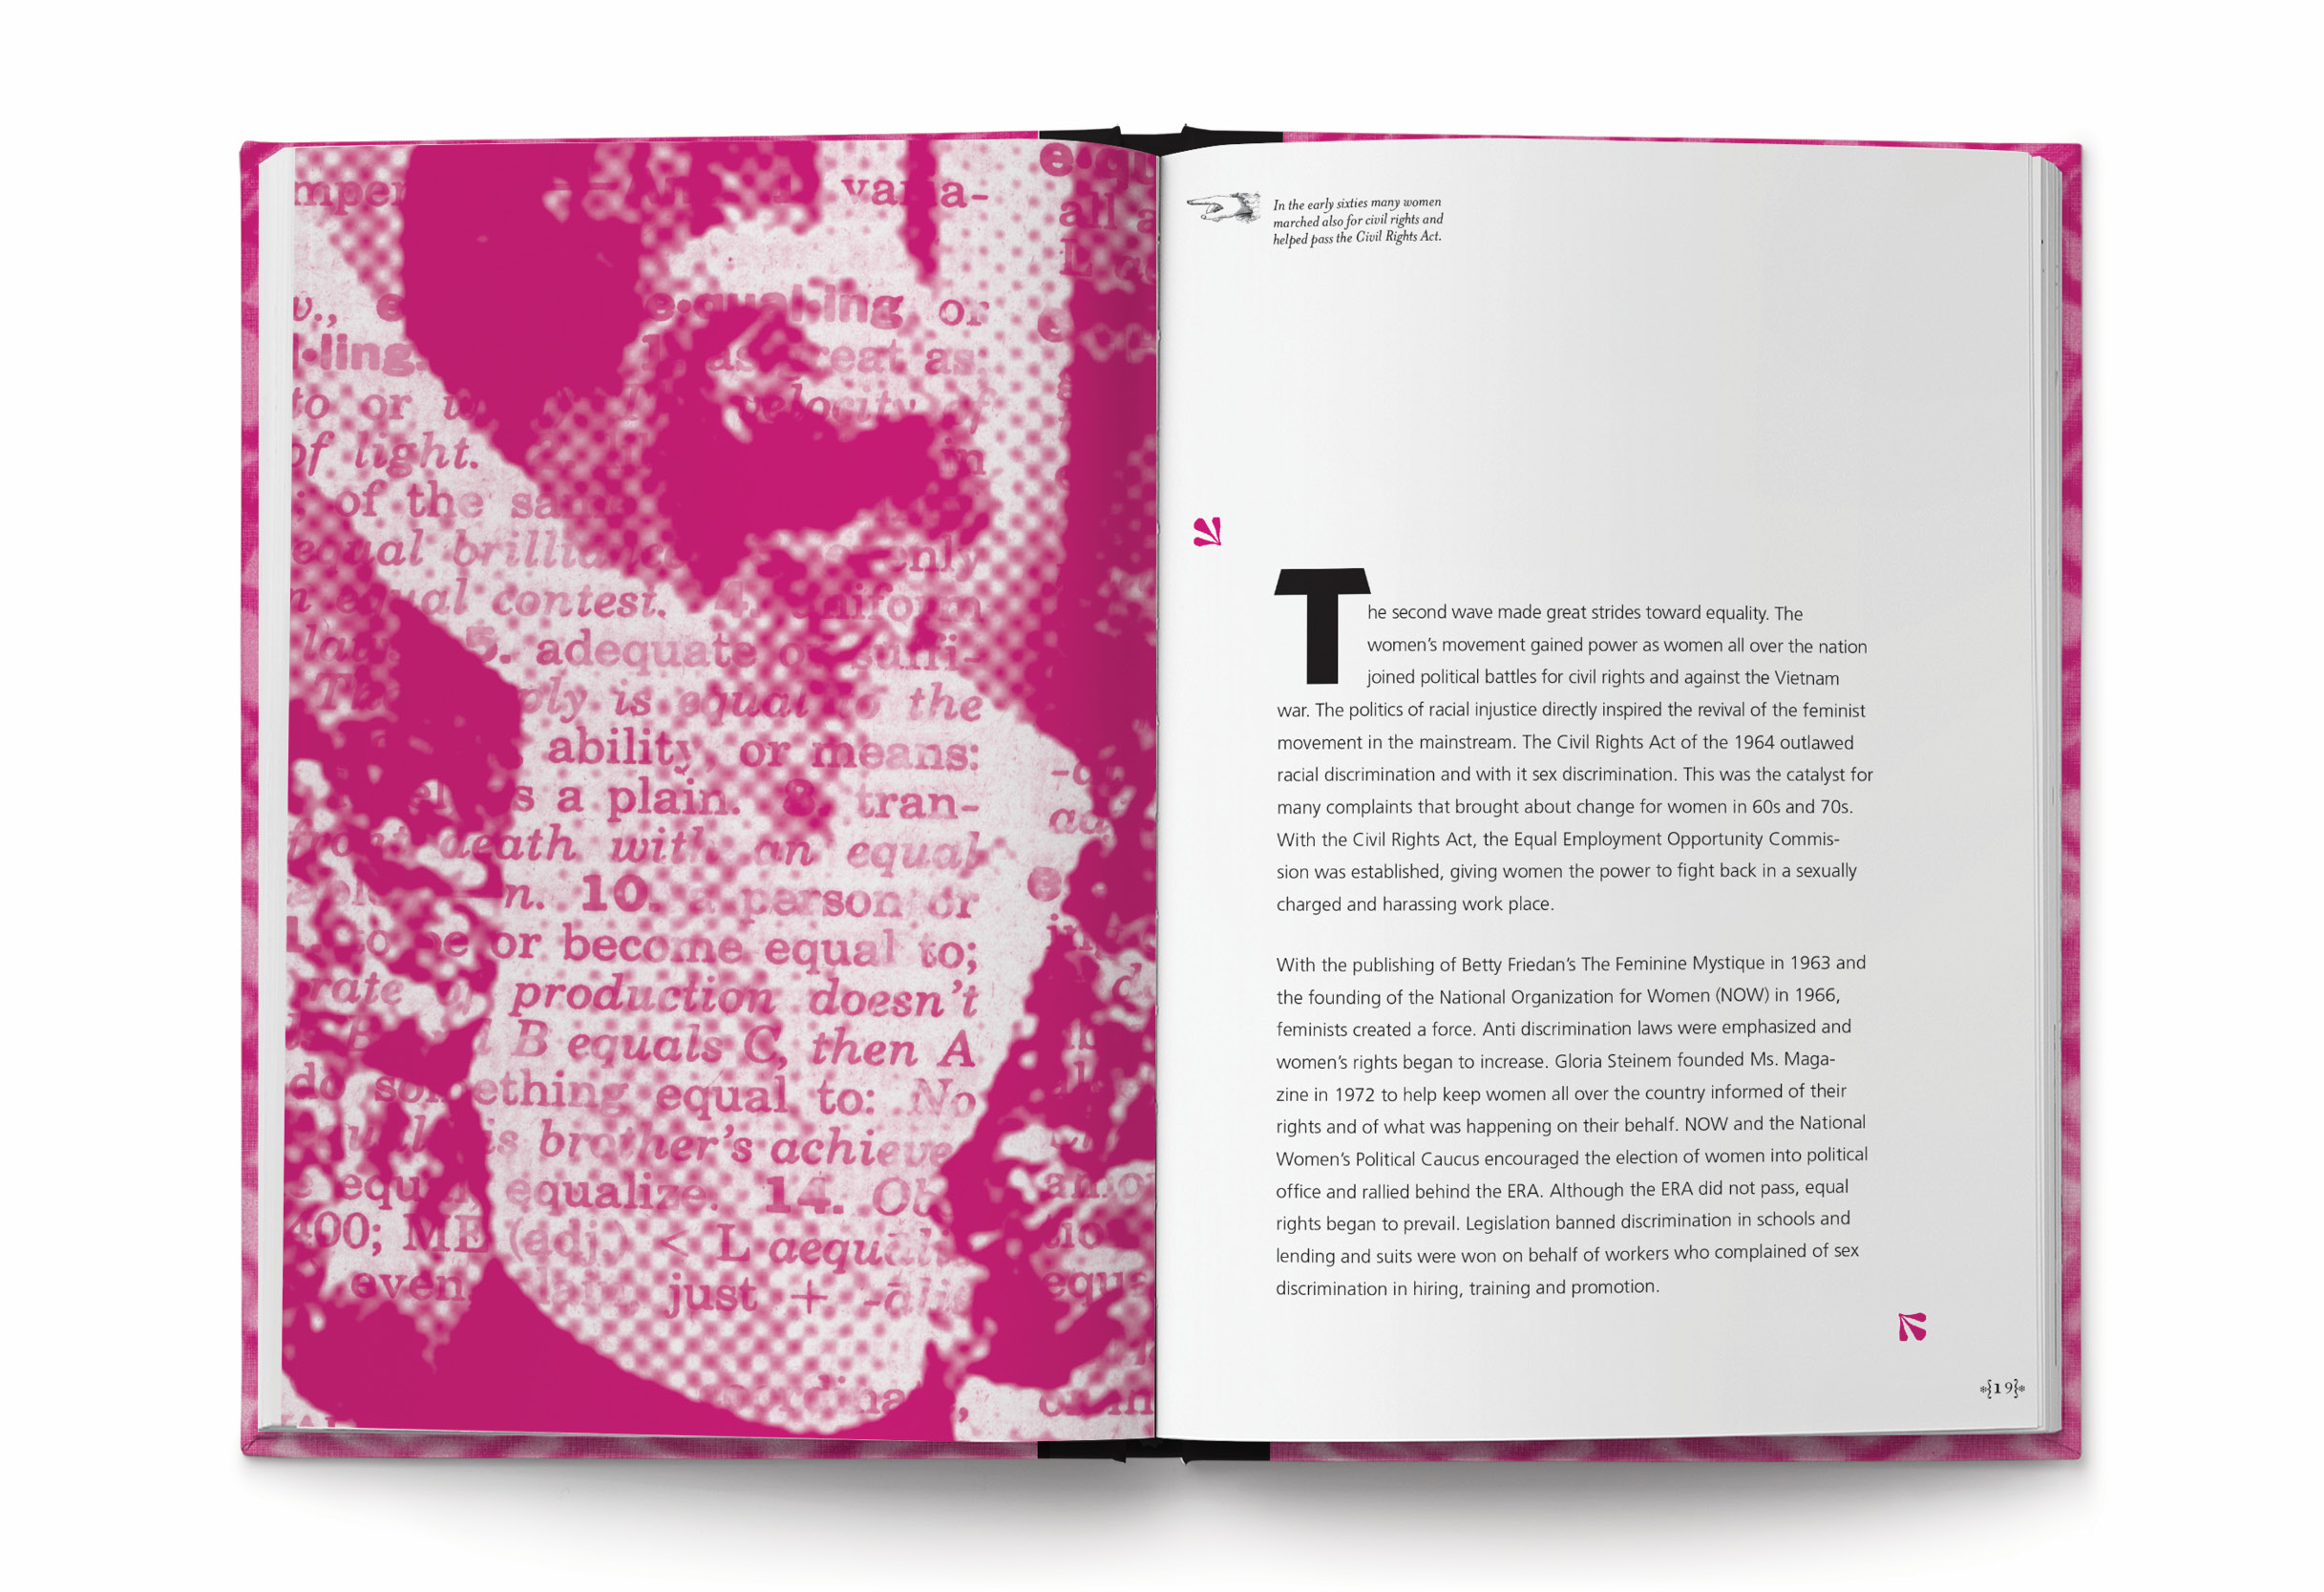 Interior spread of the book. Left hand page is a full bleed, monotoned magenta collaged image of a woman protesting with a dictionary entry overlayed. The right hand page shows a one column page of copy with generous margins.